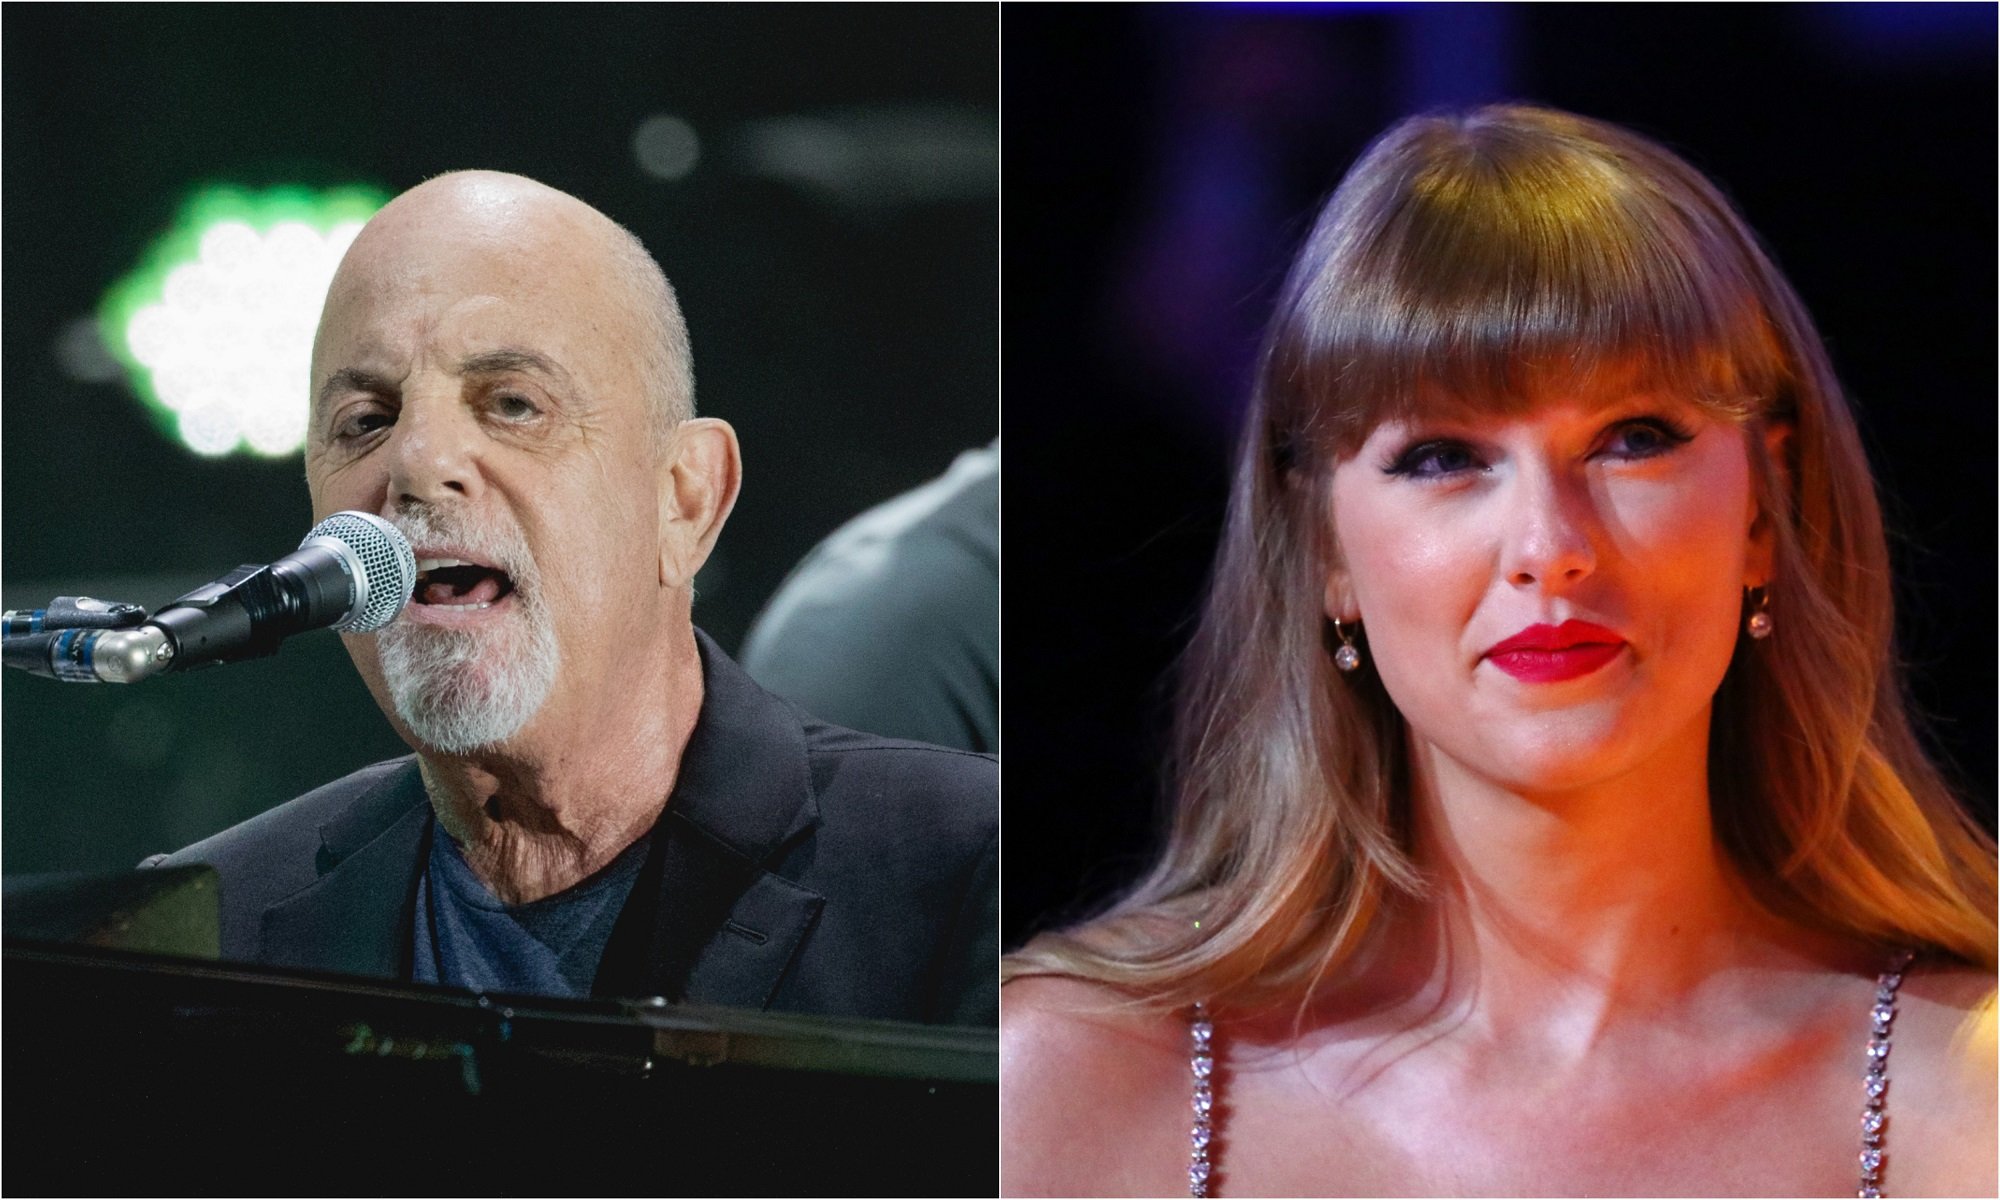 Taylor Swift dubbed 'Beatles' of new generation by Billy Joel